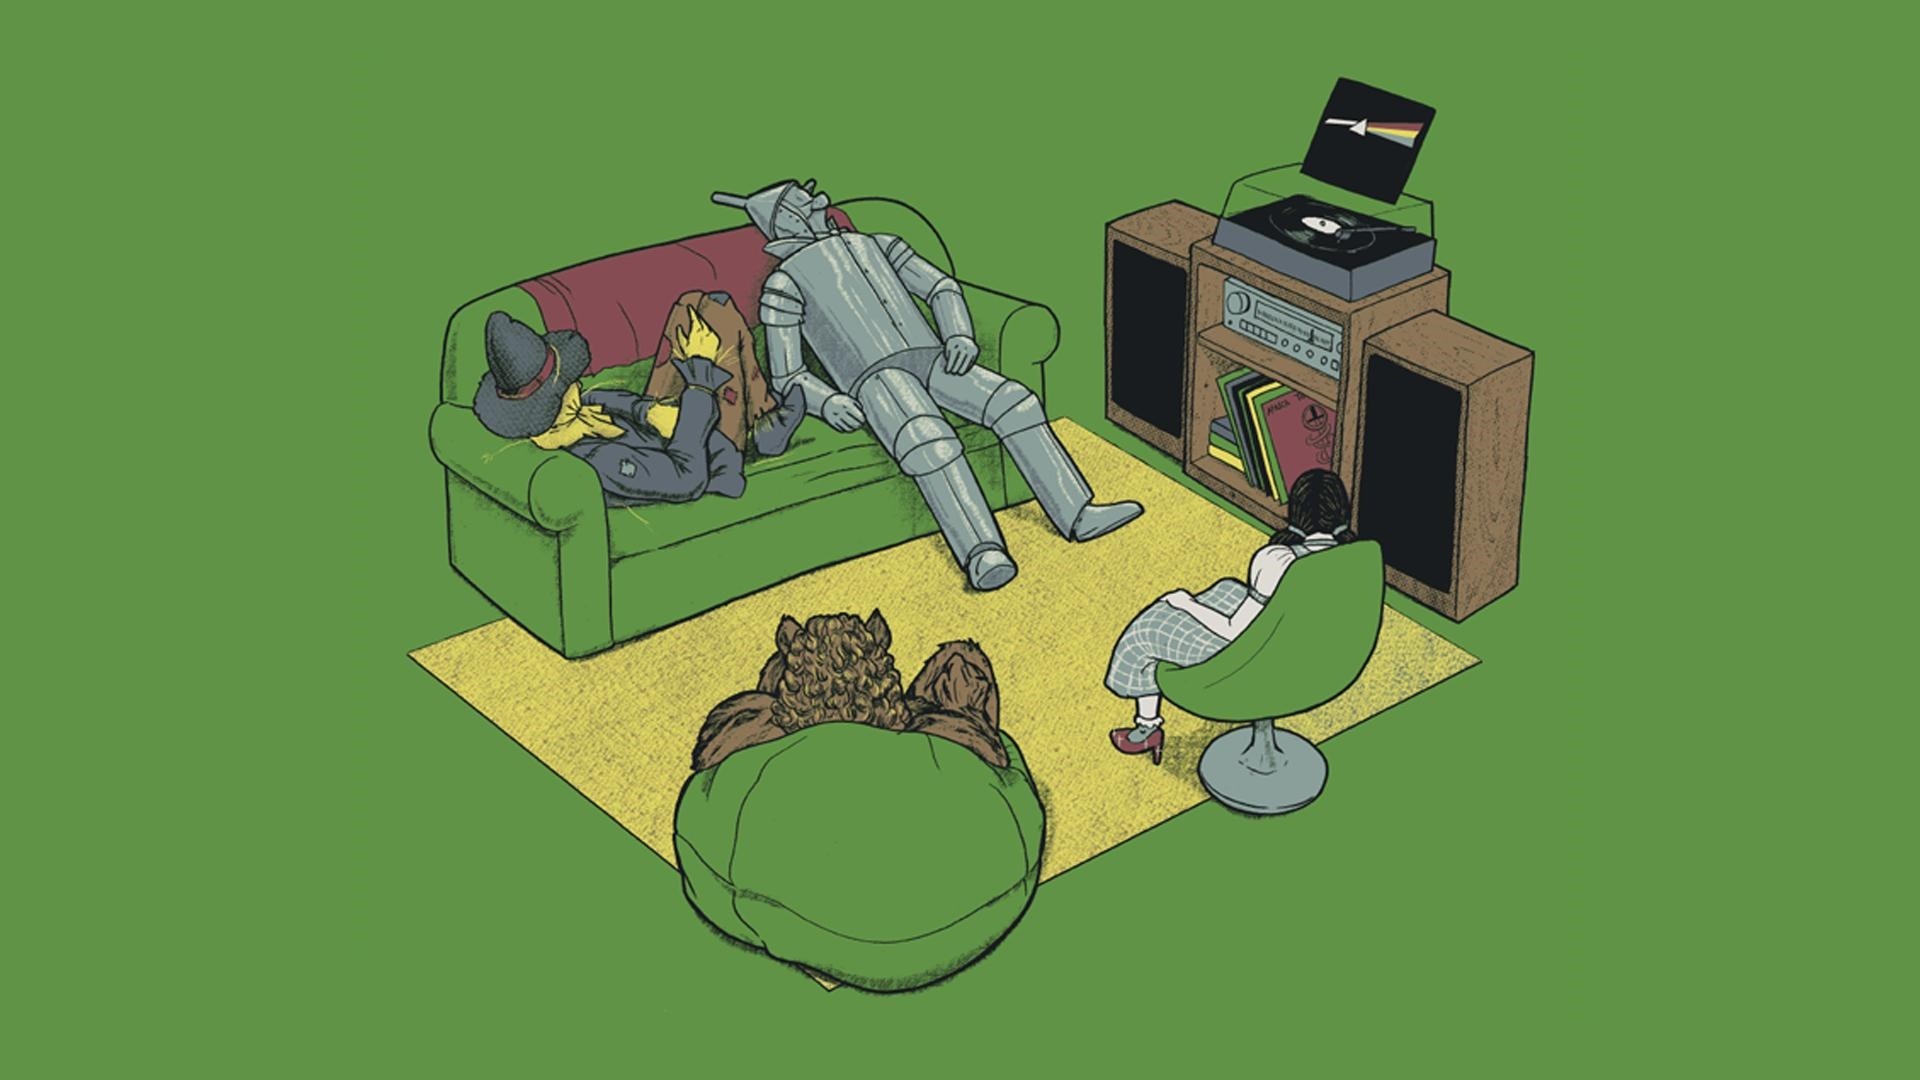 General 1920x1080 The Wizard of Oz artwork humor green background Pink Floyd sound system vinyl green couch green couch Tin Man Scarecrow (character) rug Dorothy Gale movie characters The Dark Side of the Moon turntables record players